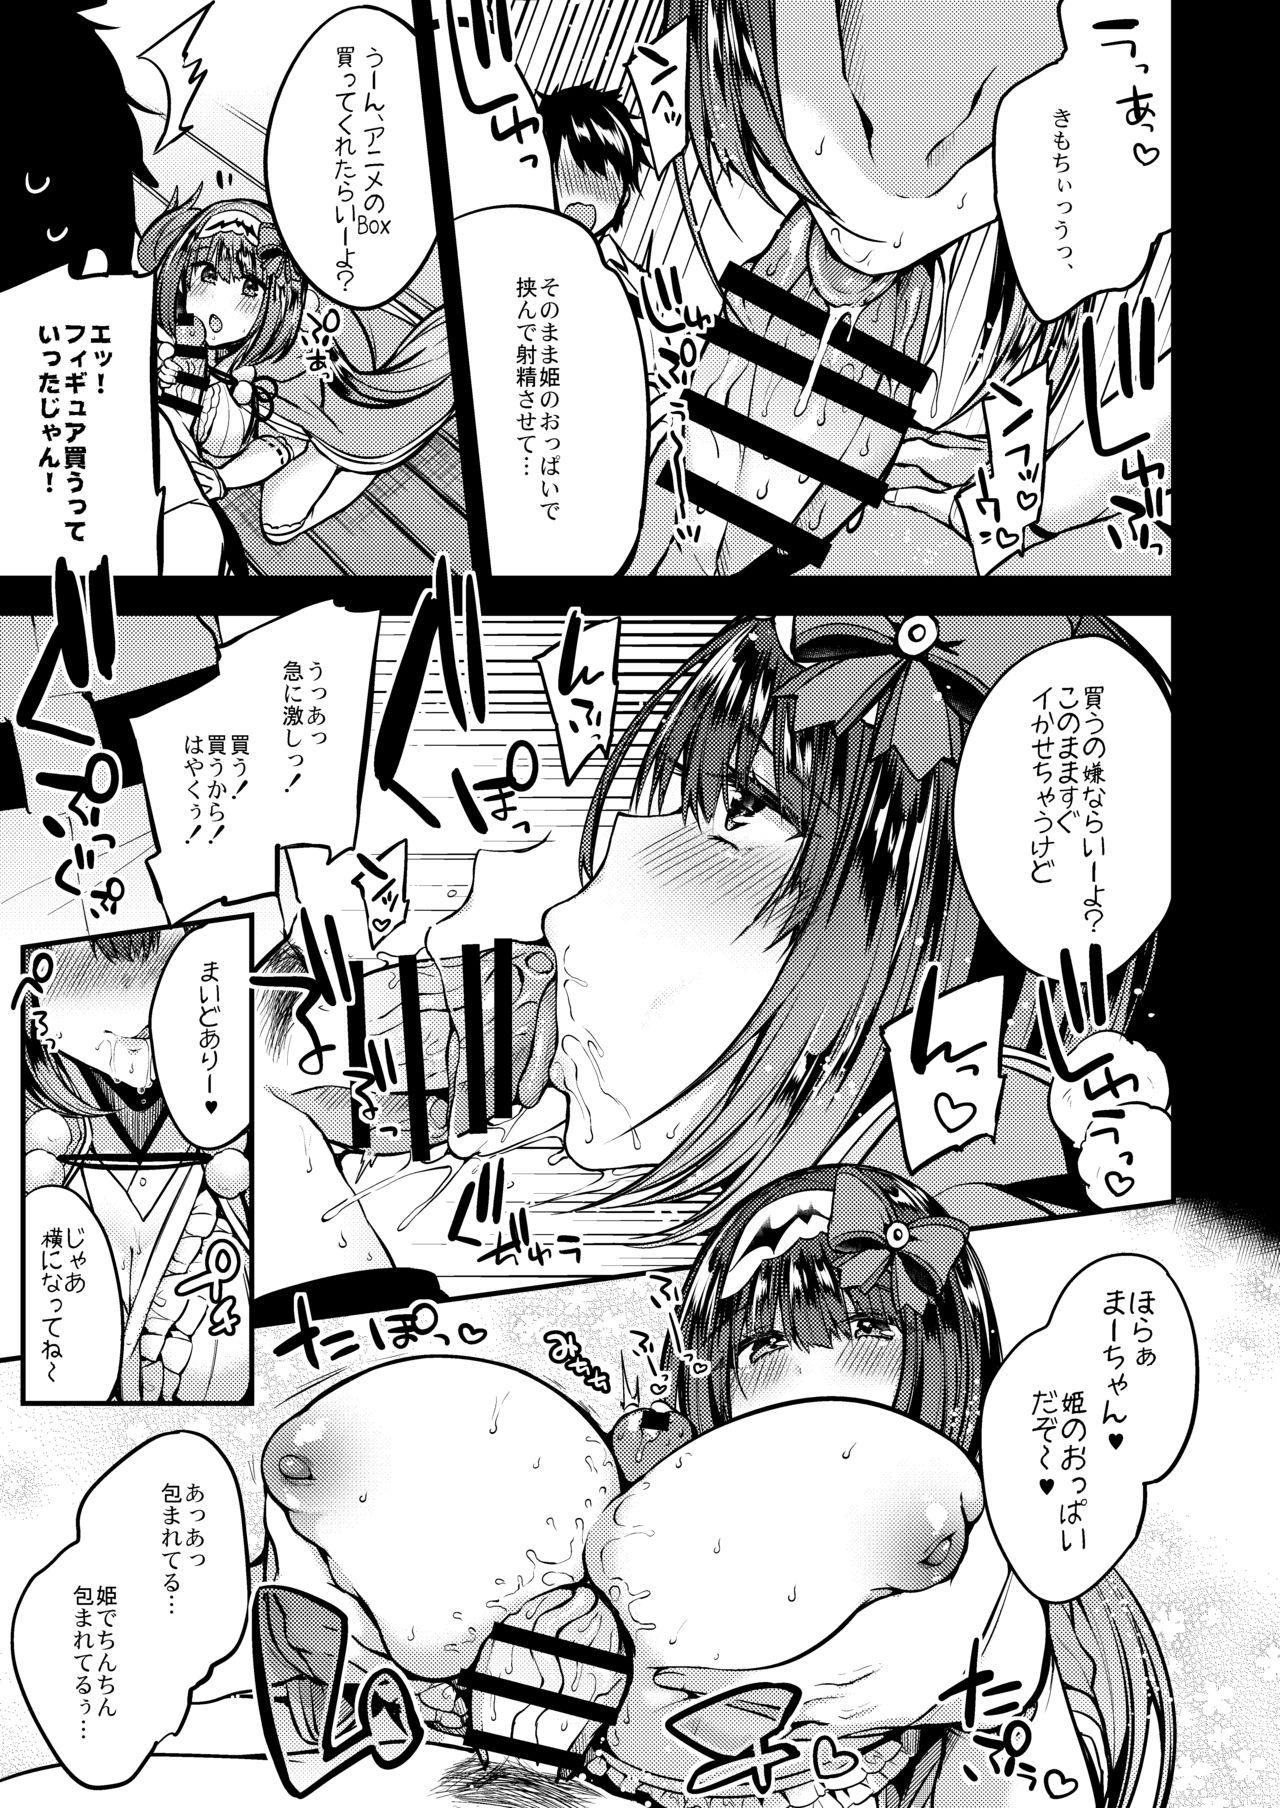 Old And Young Makeinu Hime - Fate grand order Groupsex - Page 6